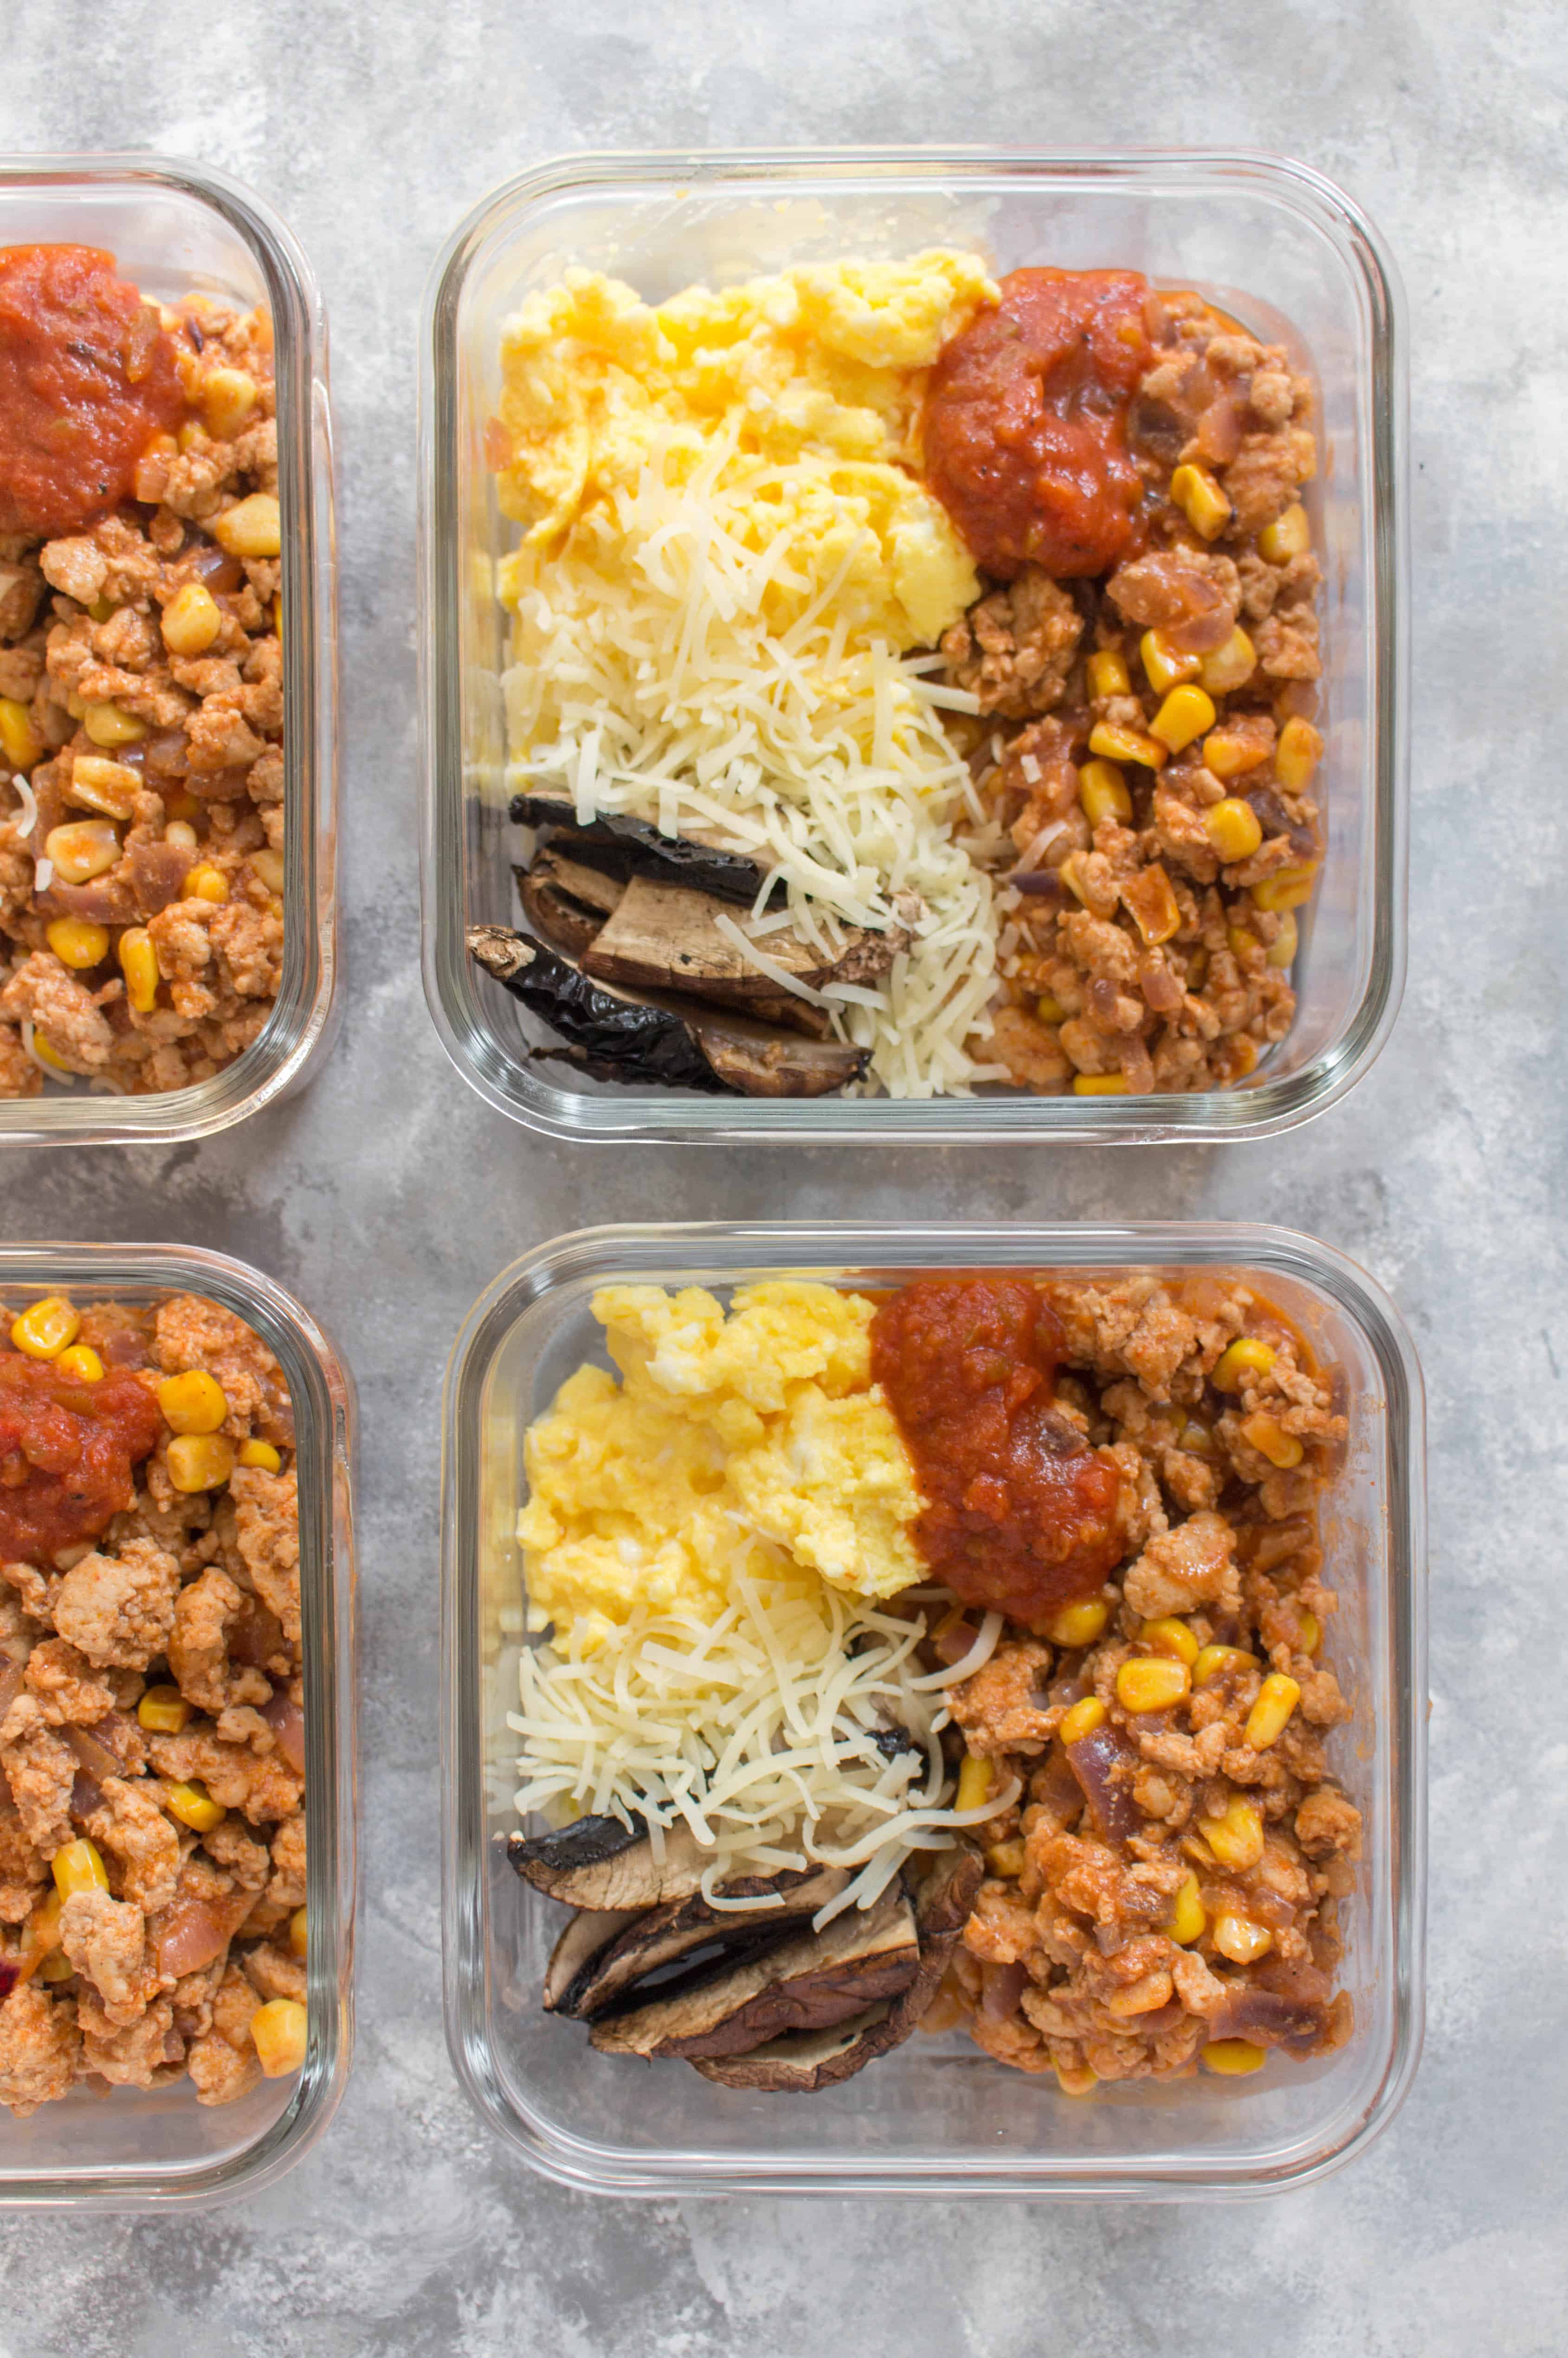 Go to bed excited for the morning with this delicious make ahead breakfast taco egg bowl! The perfect meal prep to get through the mornings and a fun way to celebrate World Egg Day!